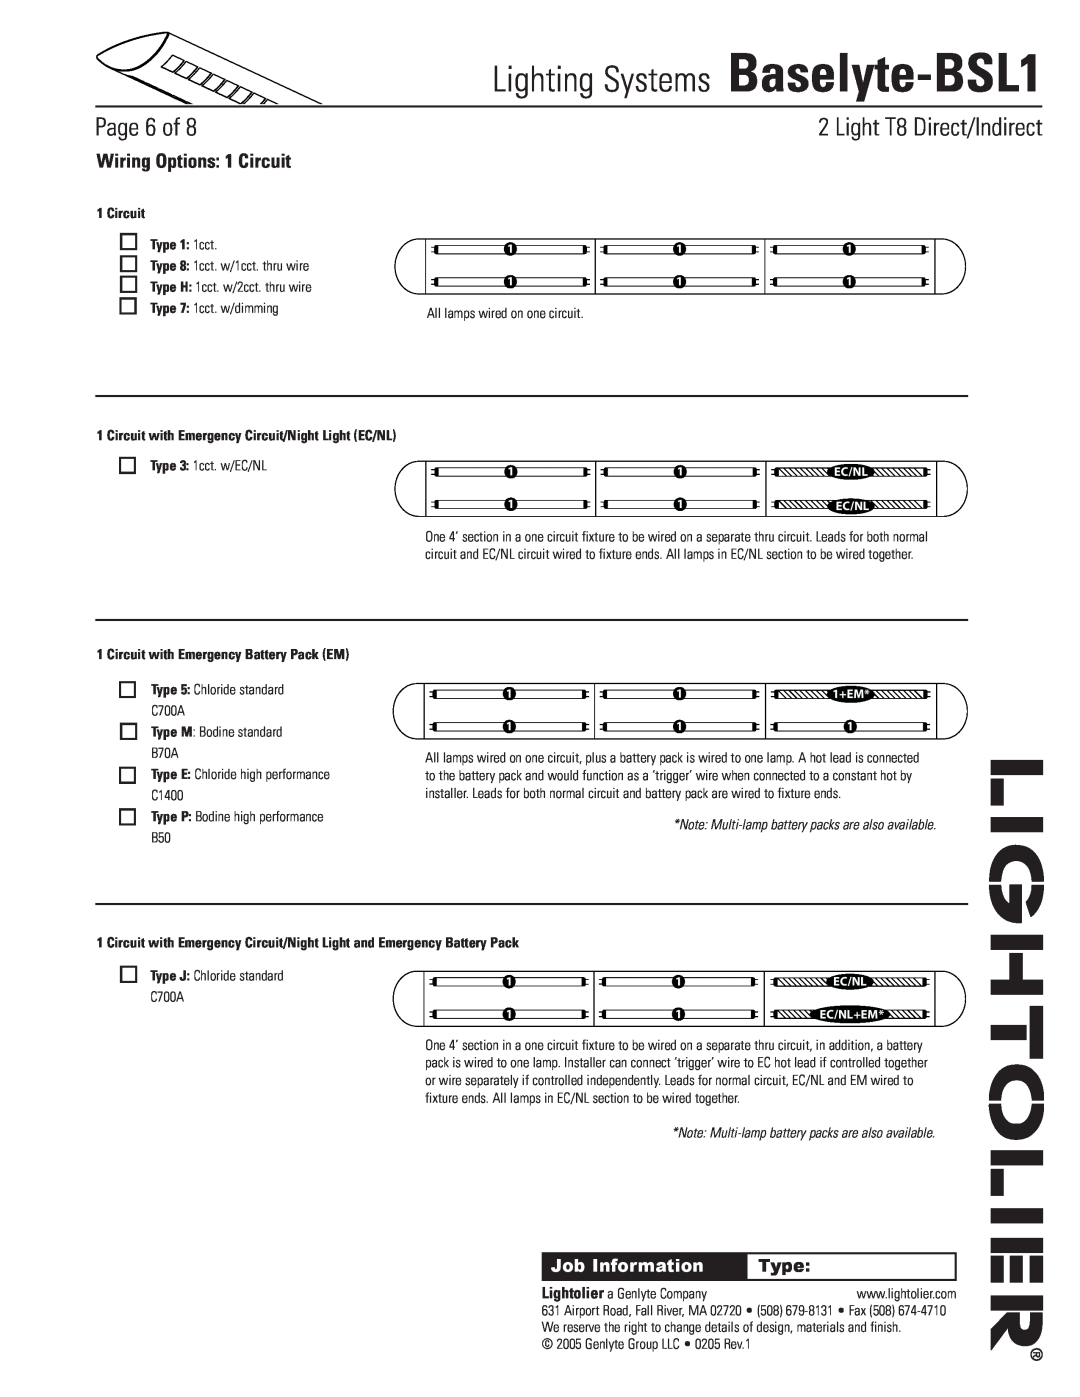 Lightolier Baselyte-BSL1 Wiring Options 1 Circuit, Circuit Type 1 1cct, Circuit with Emergency Battery Pack EM, Page of 